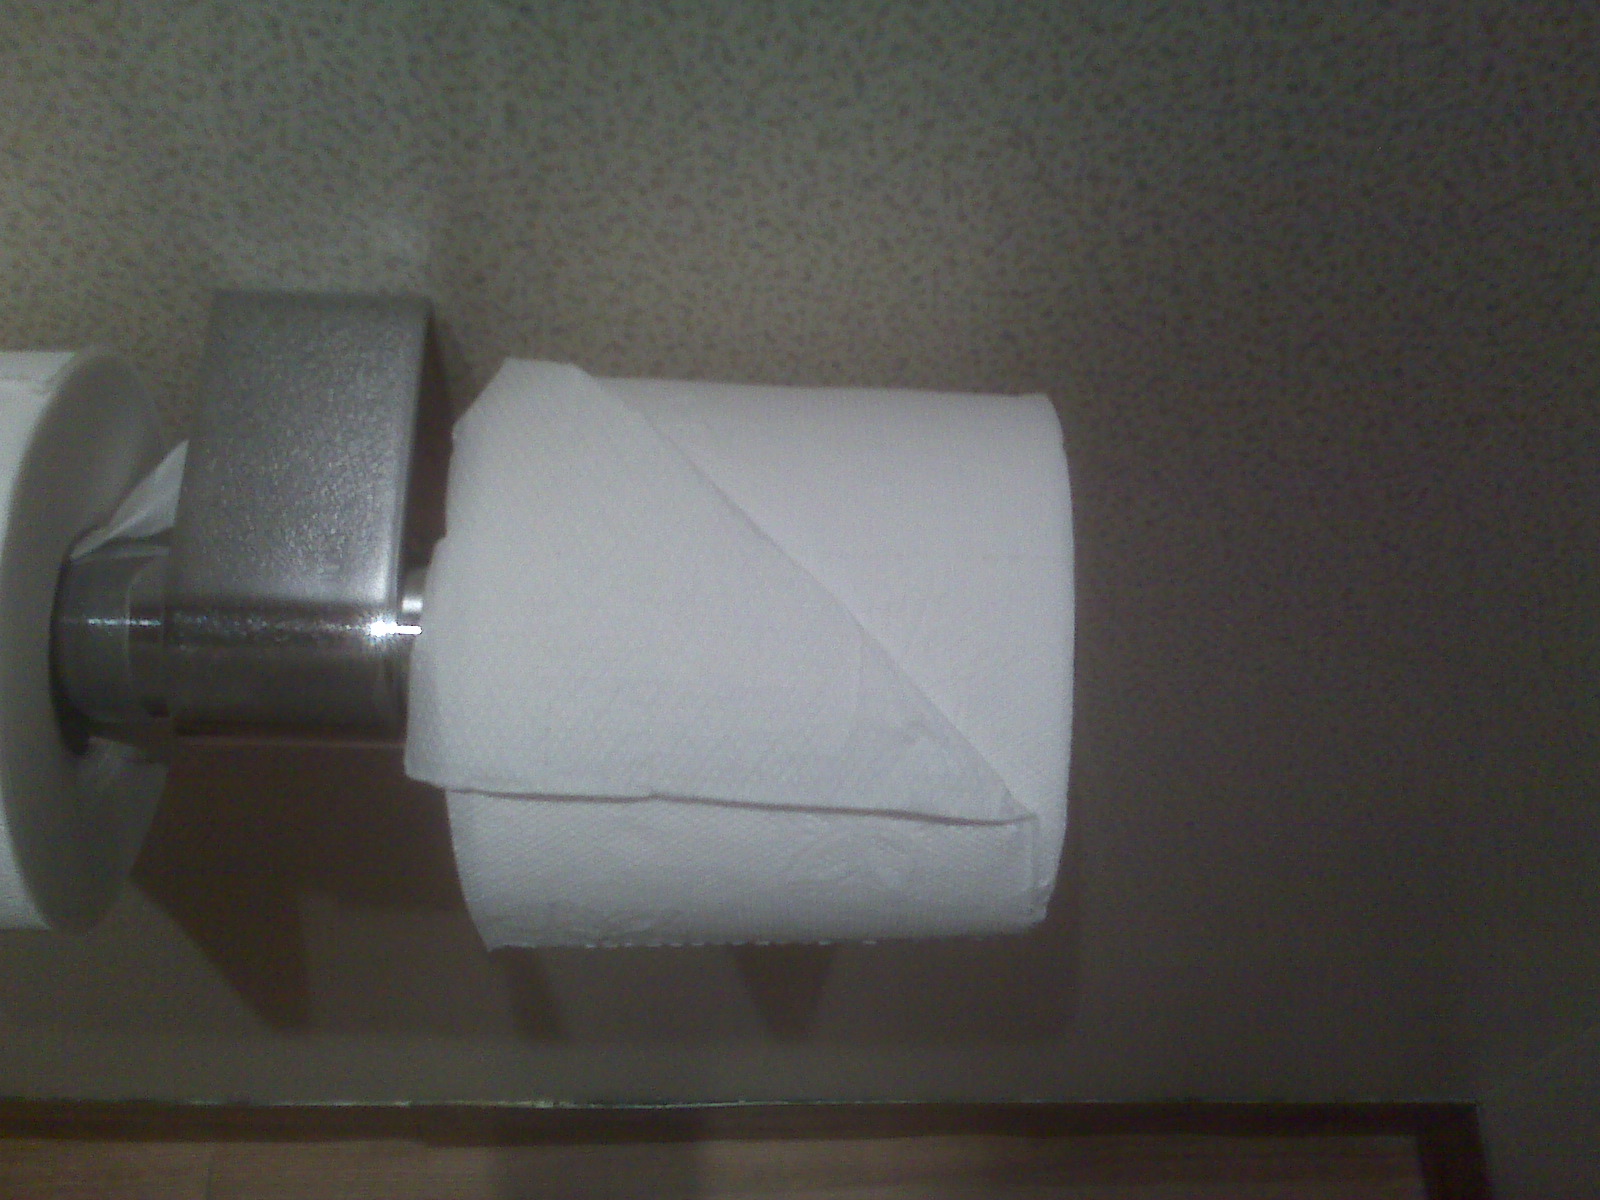 a rolled up white tissue paper in a bathroom